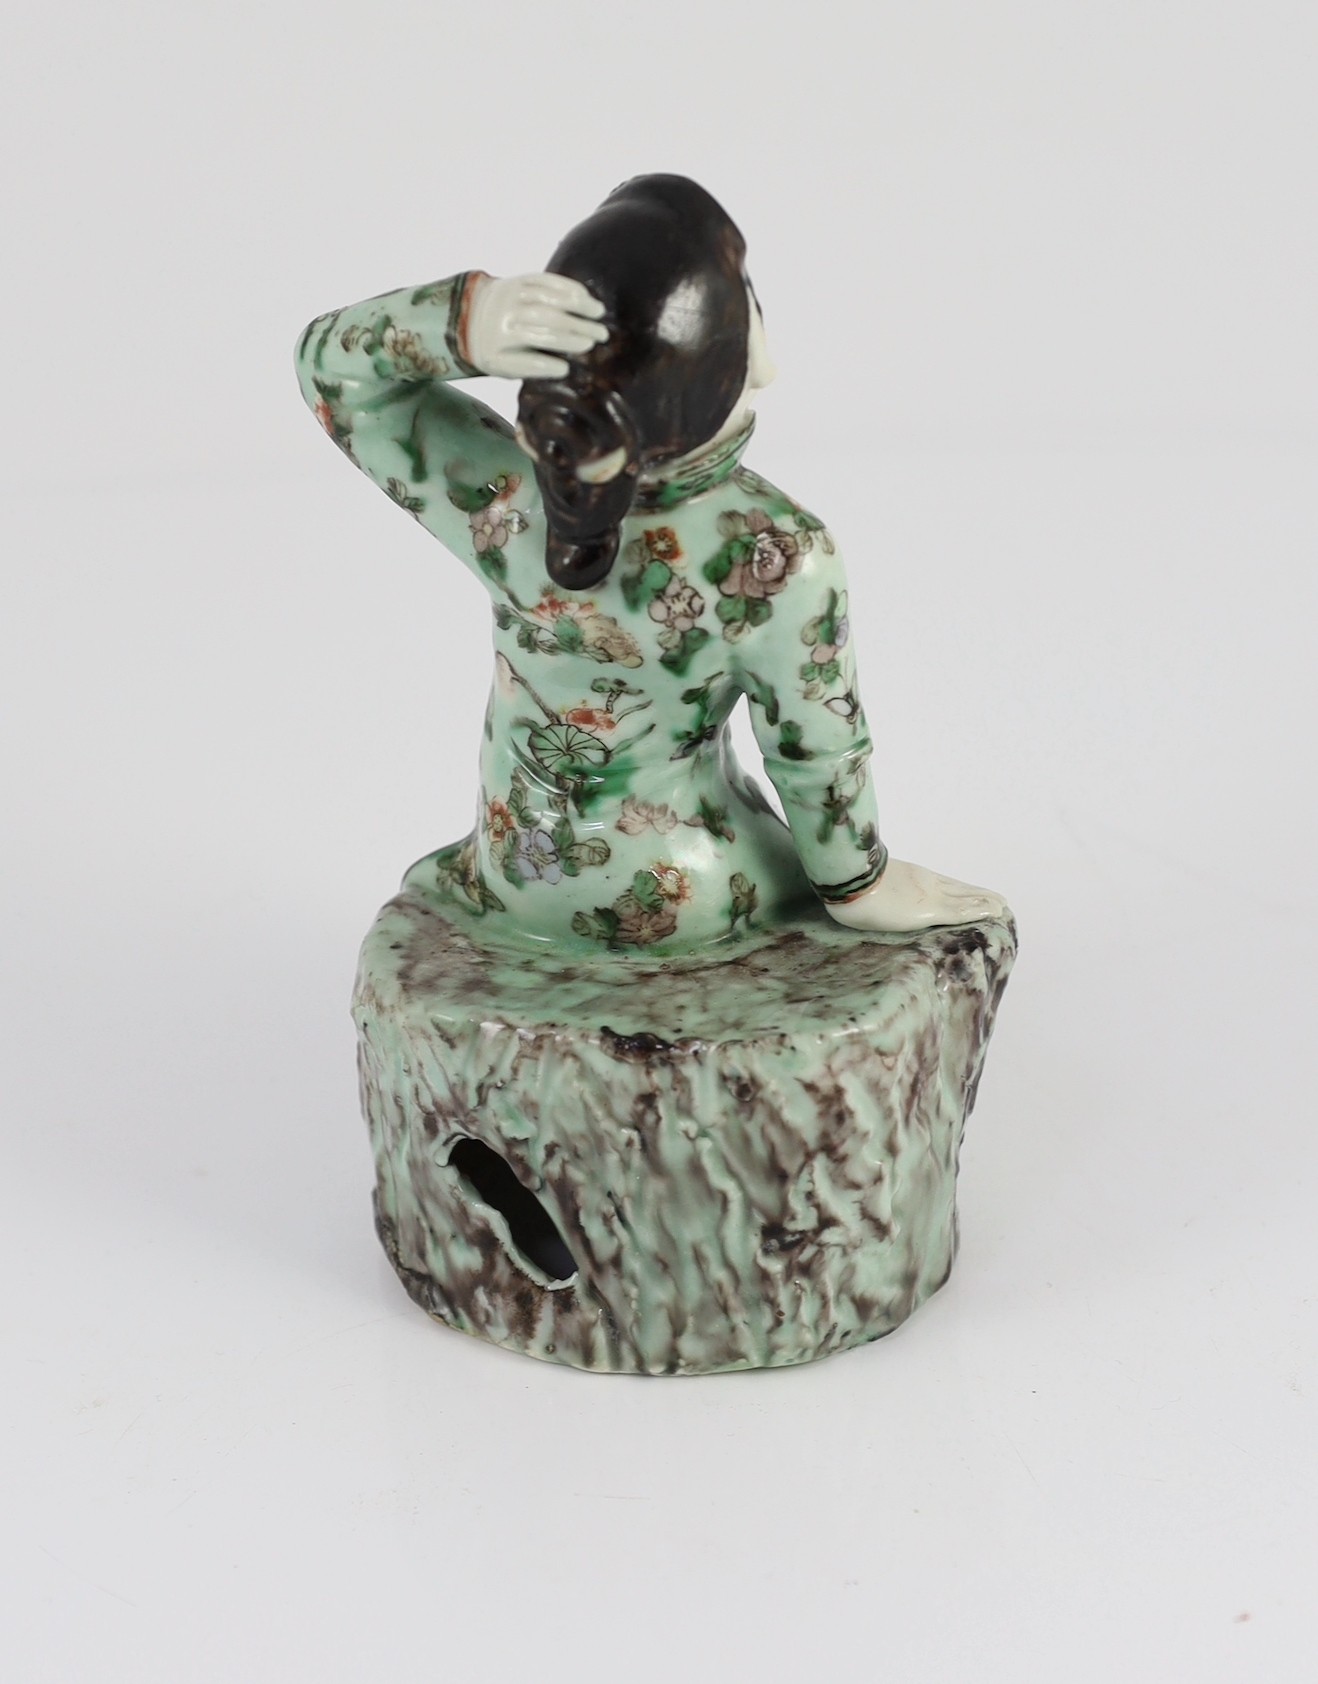 A Chinese enamelled porcelain figure of a Han Chinese woman, late 19th century, seated on a tree - Image 2 of 3